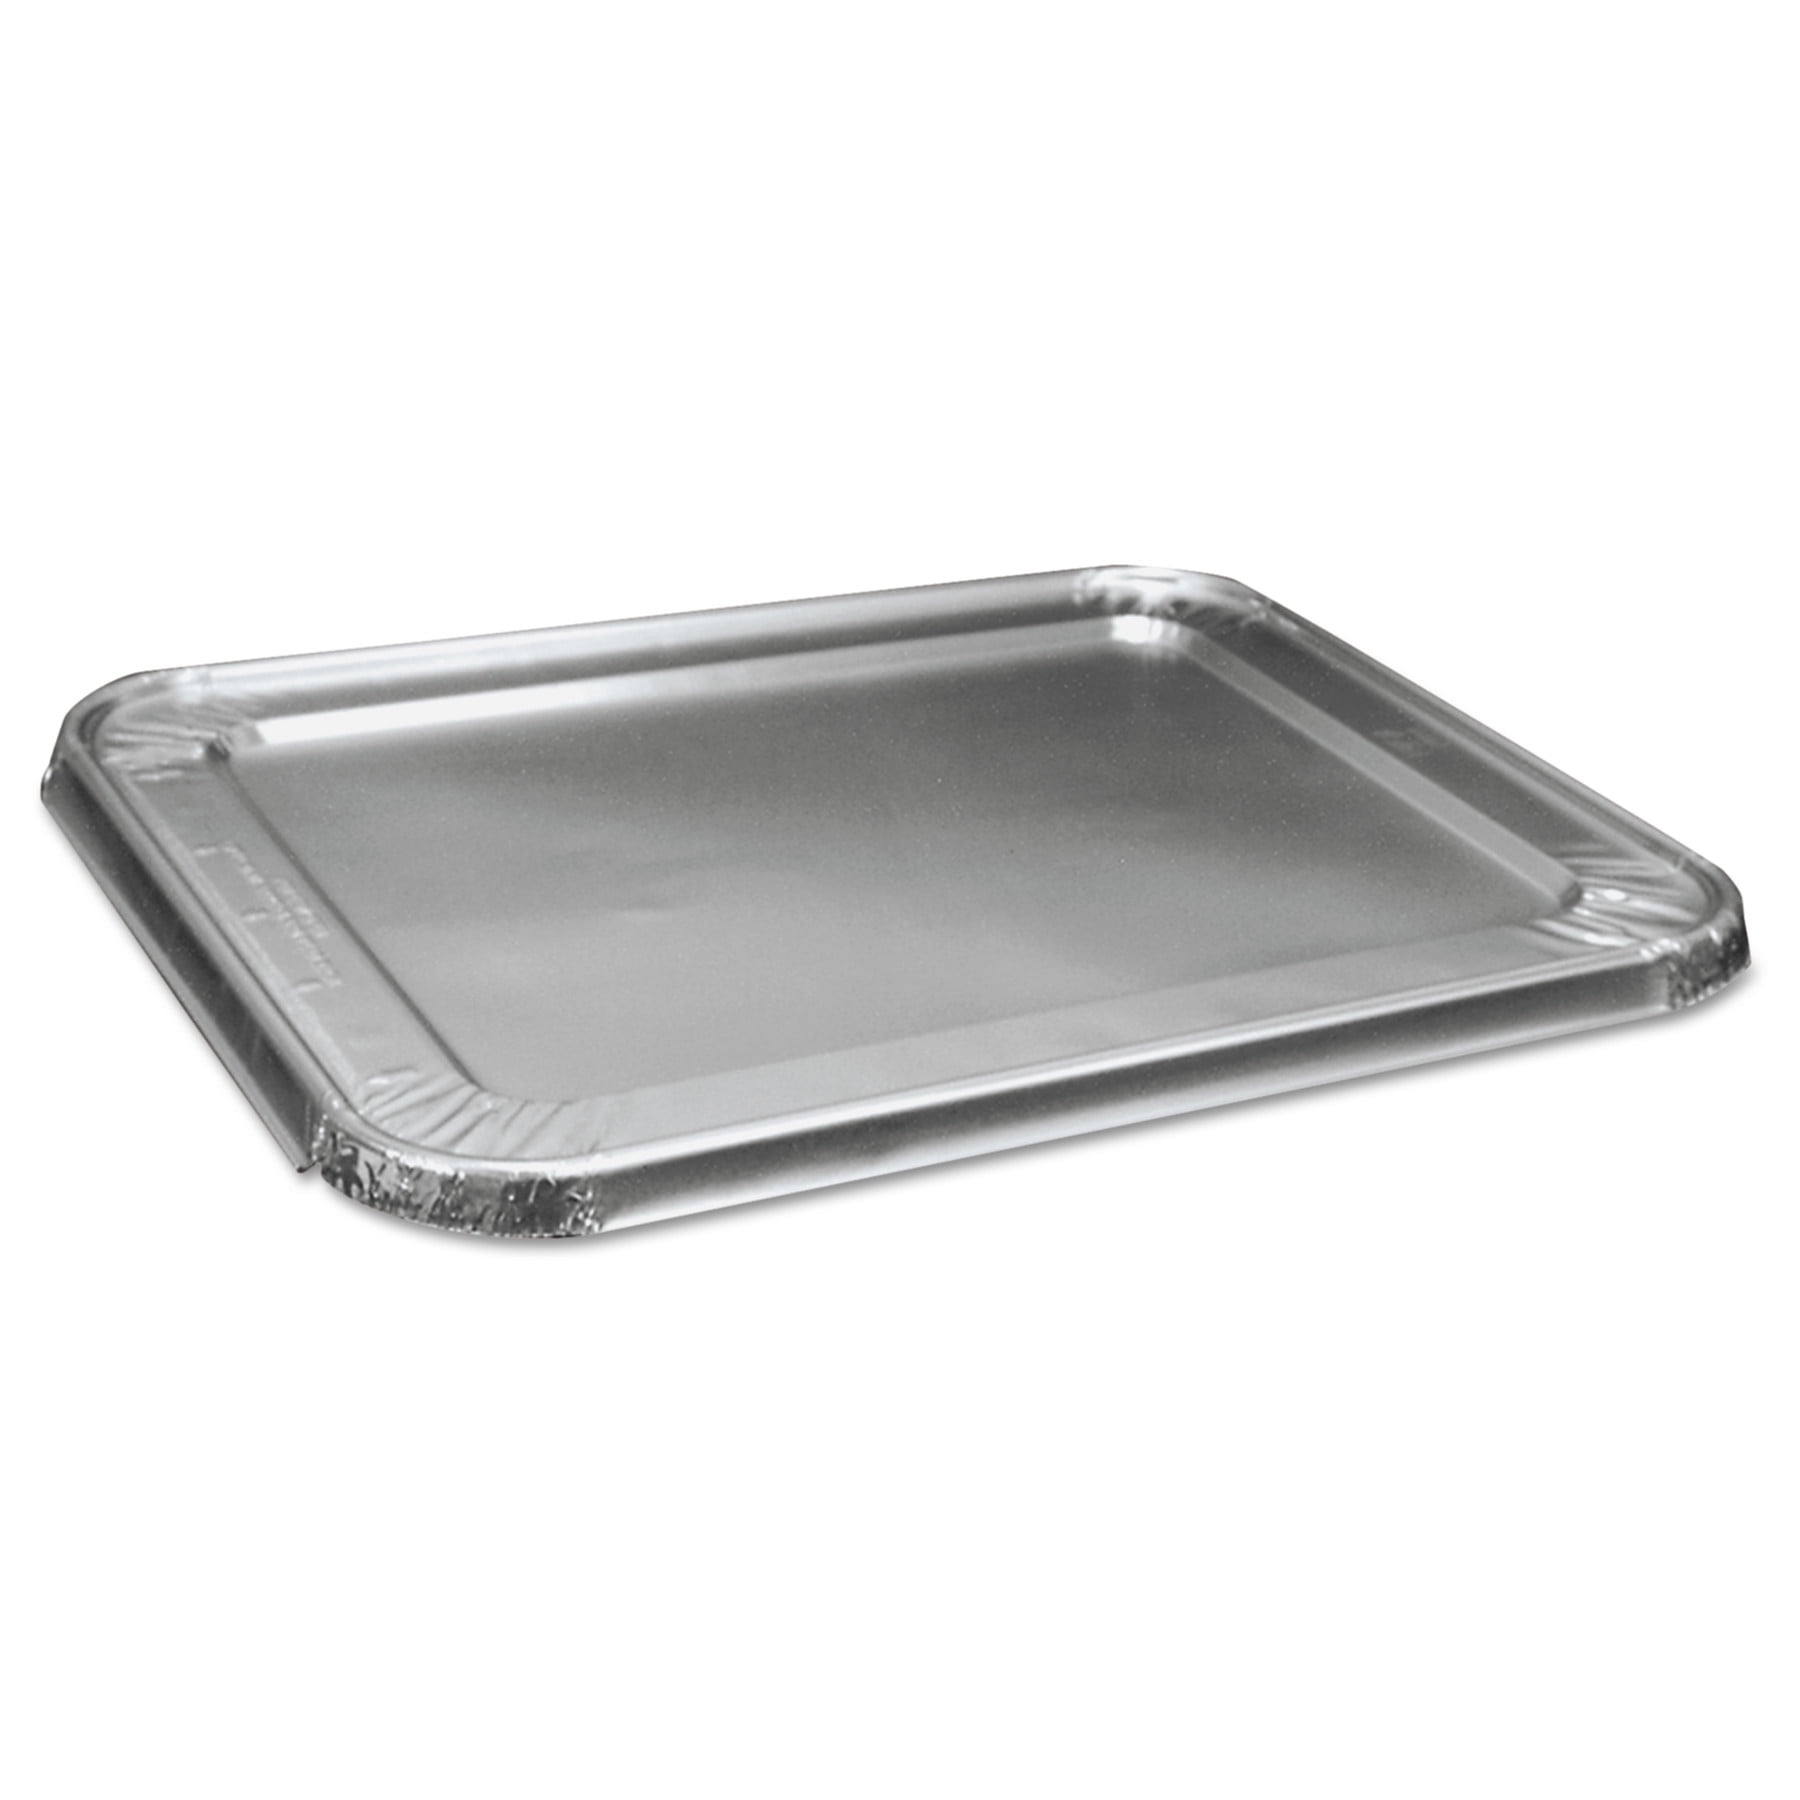 1/9 Size Stainless Steel Solid Steam Table Pan Cover,Pan Lids Lid for 1/9 Size Steam Pans with Handle Non-Stick Surface 